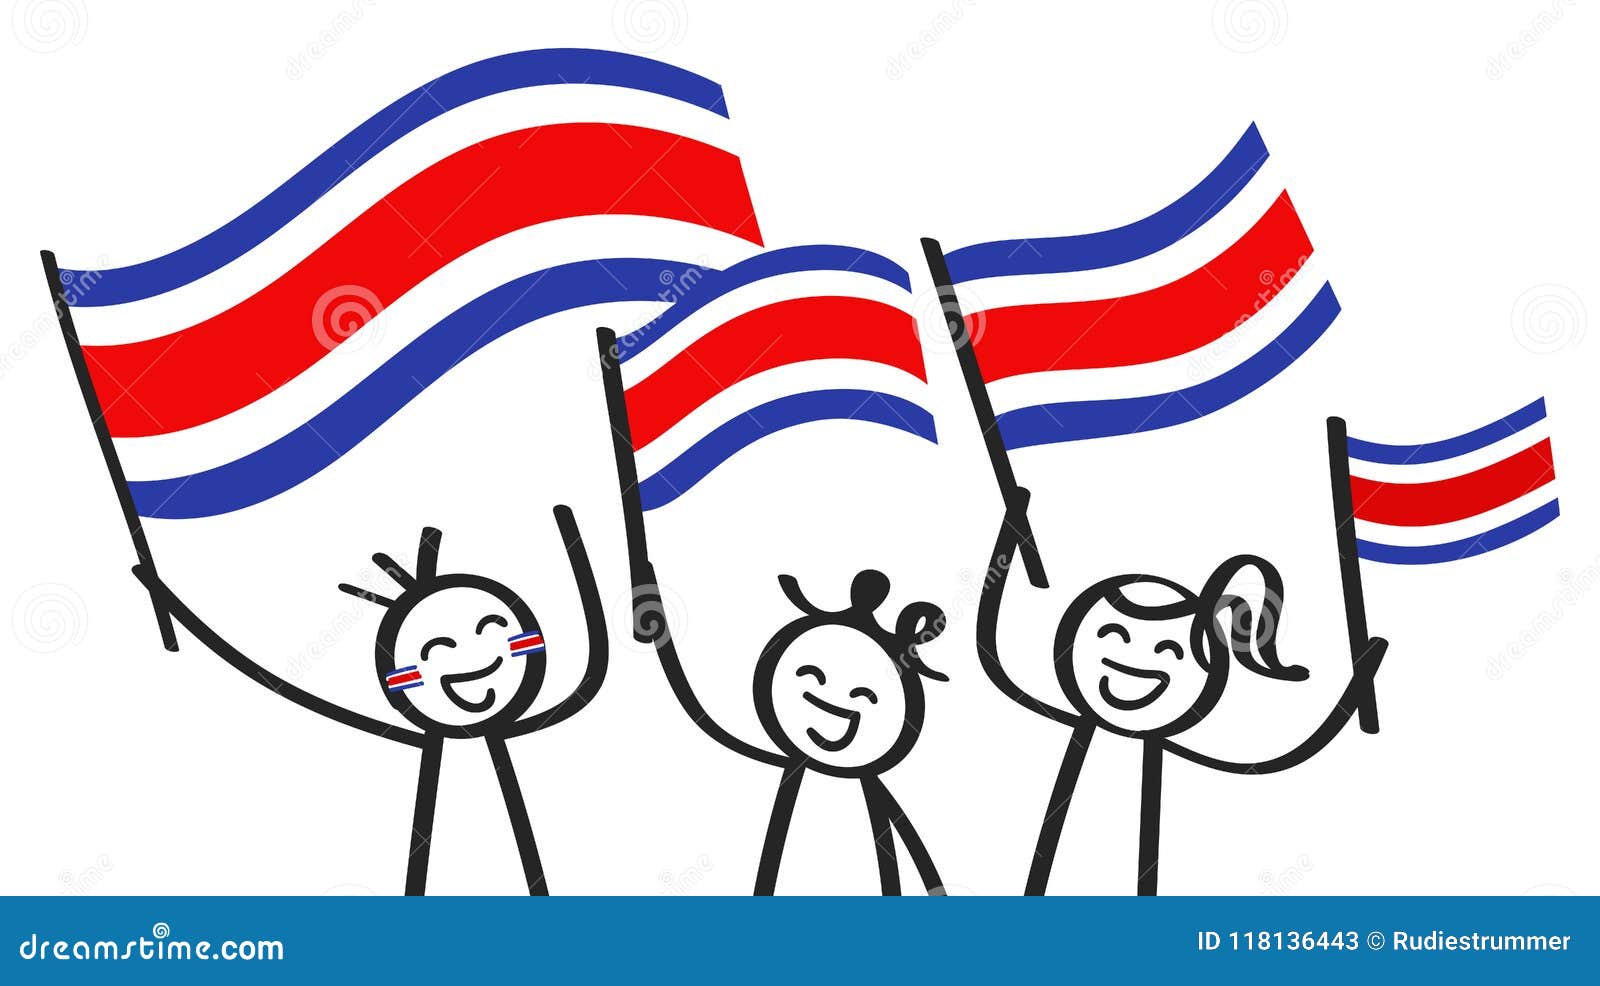 Cheering Group of Three Happy Stick Figures with Costa Rican National ...